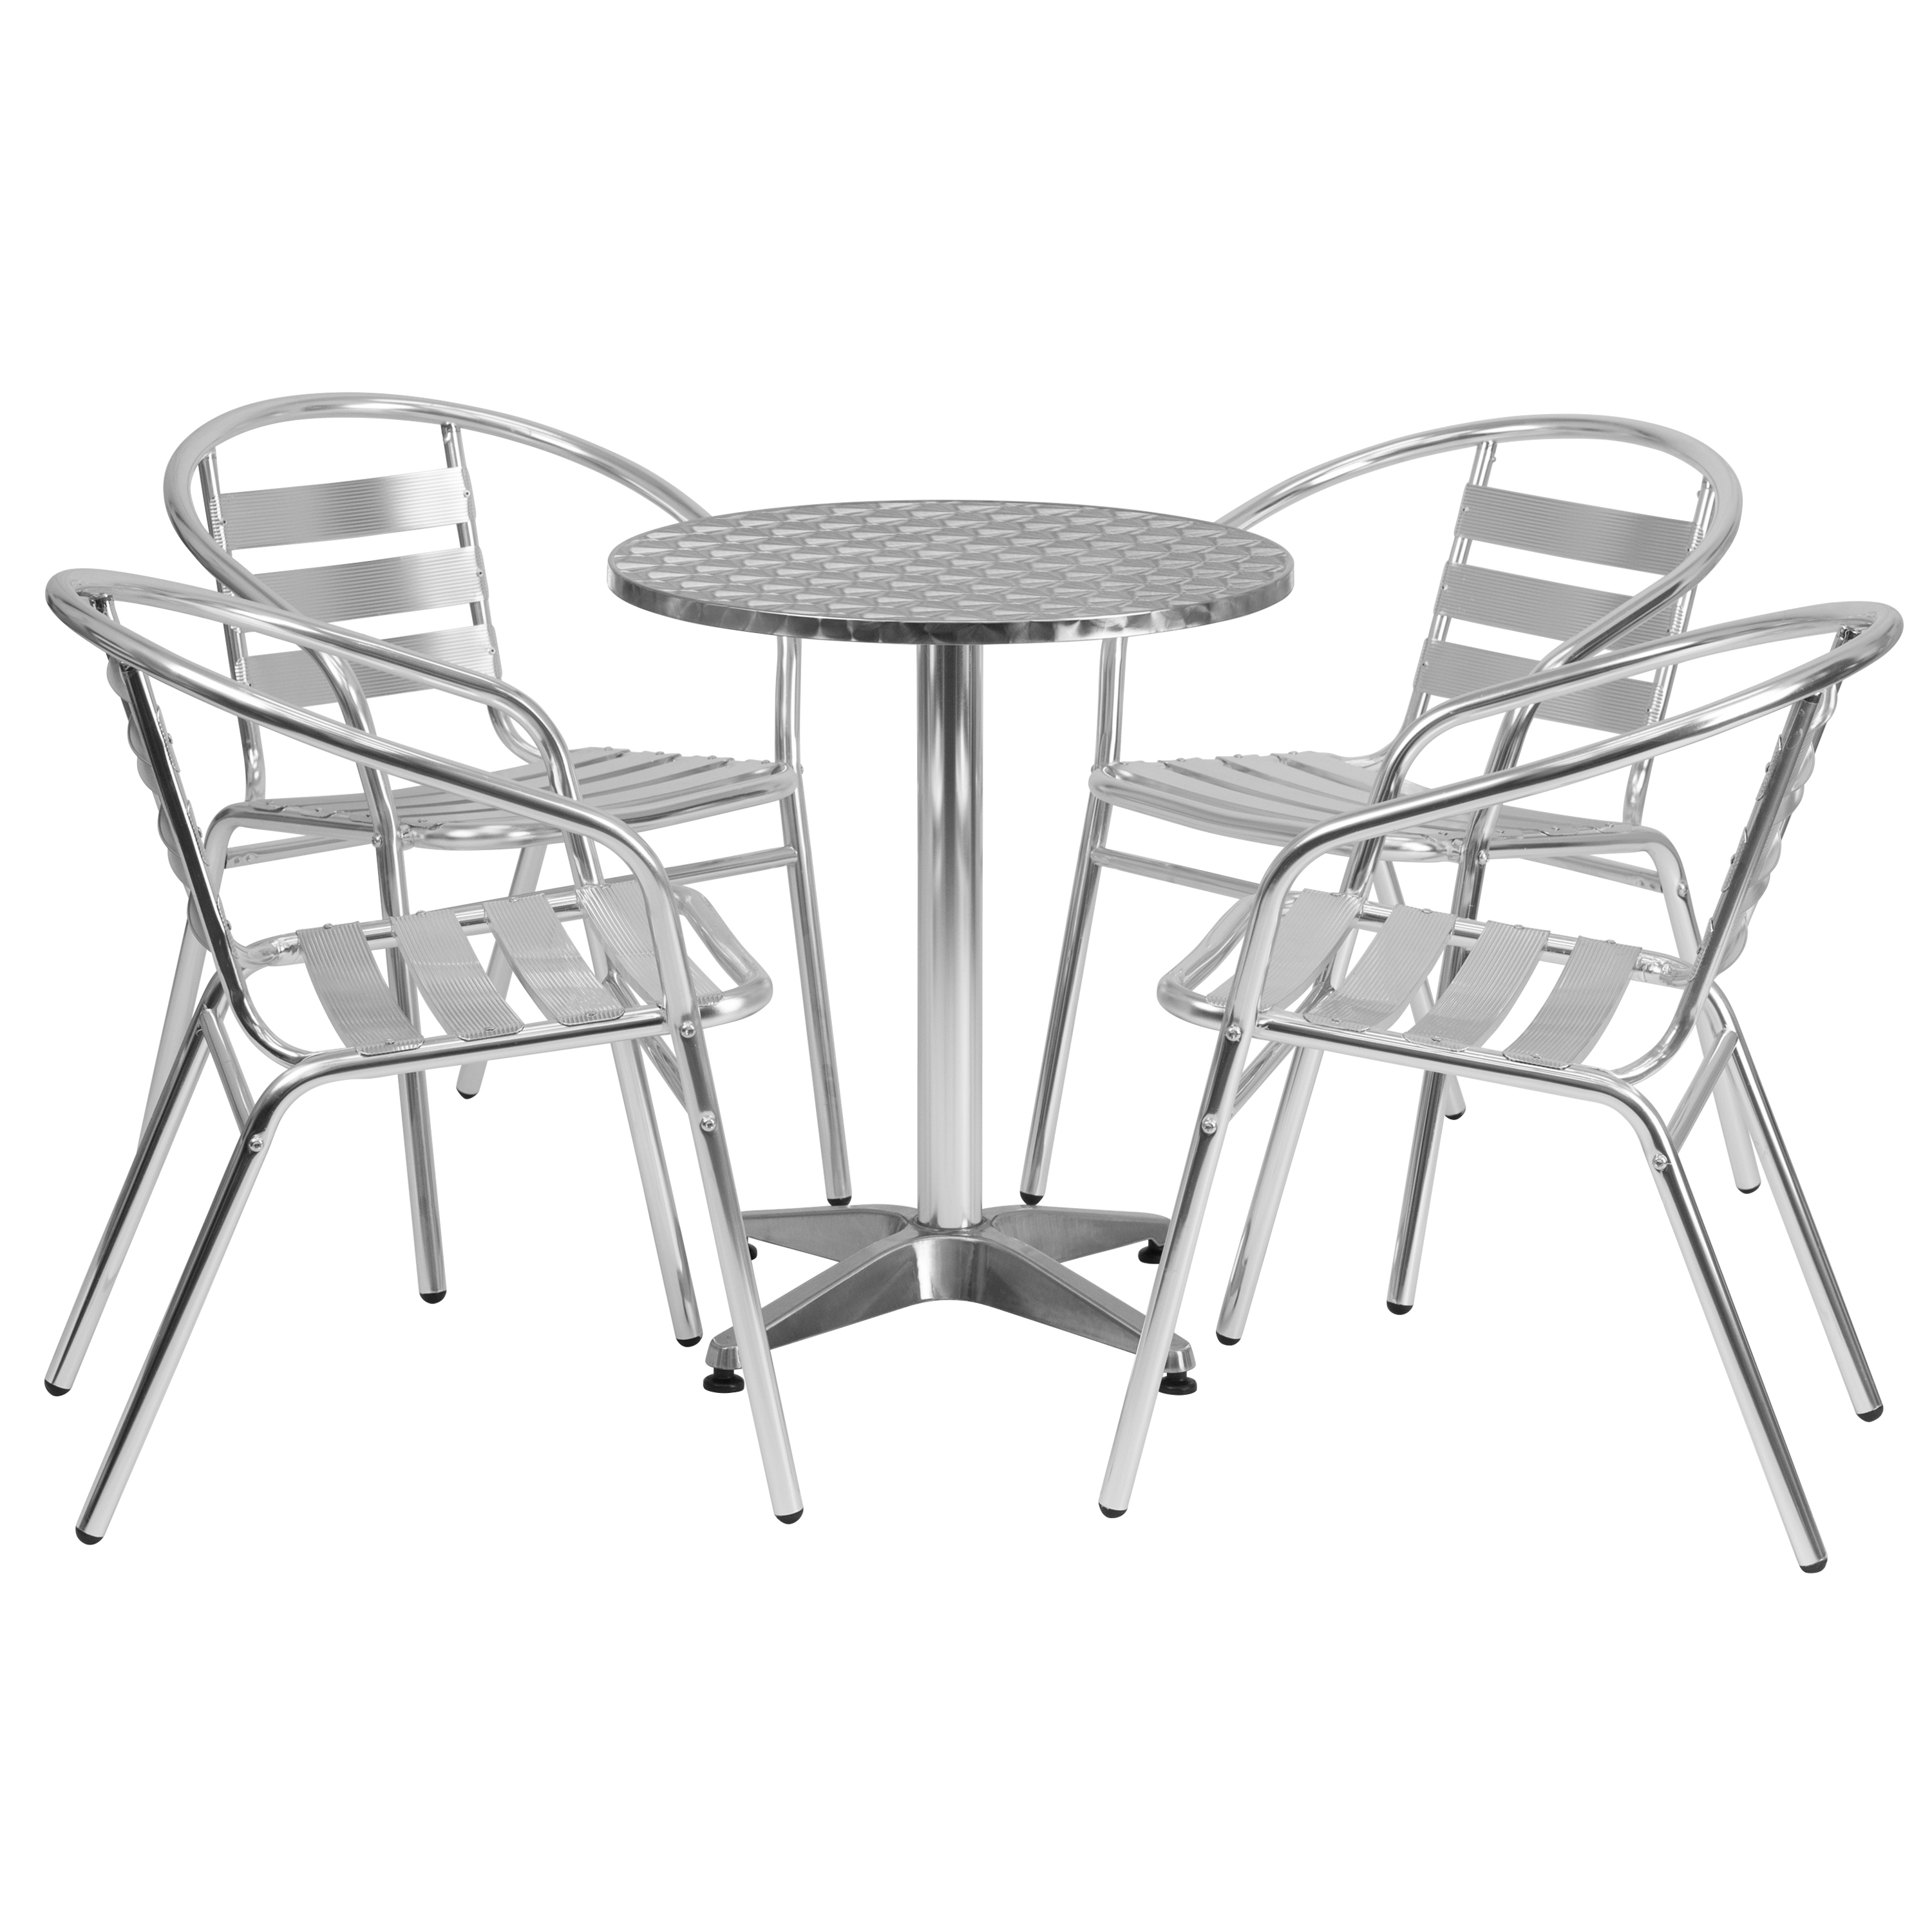 Flash Furniture 23.5'' Round Aluminum Indoor-Outdoor Table Set with 4 Slat Back Chairs - image 2 of 5